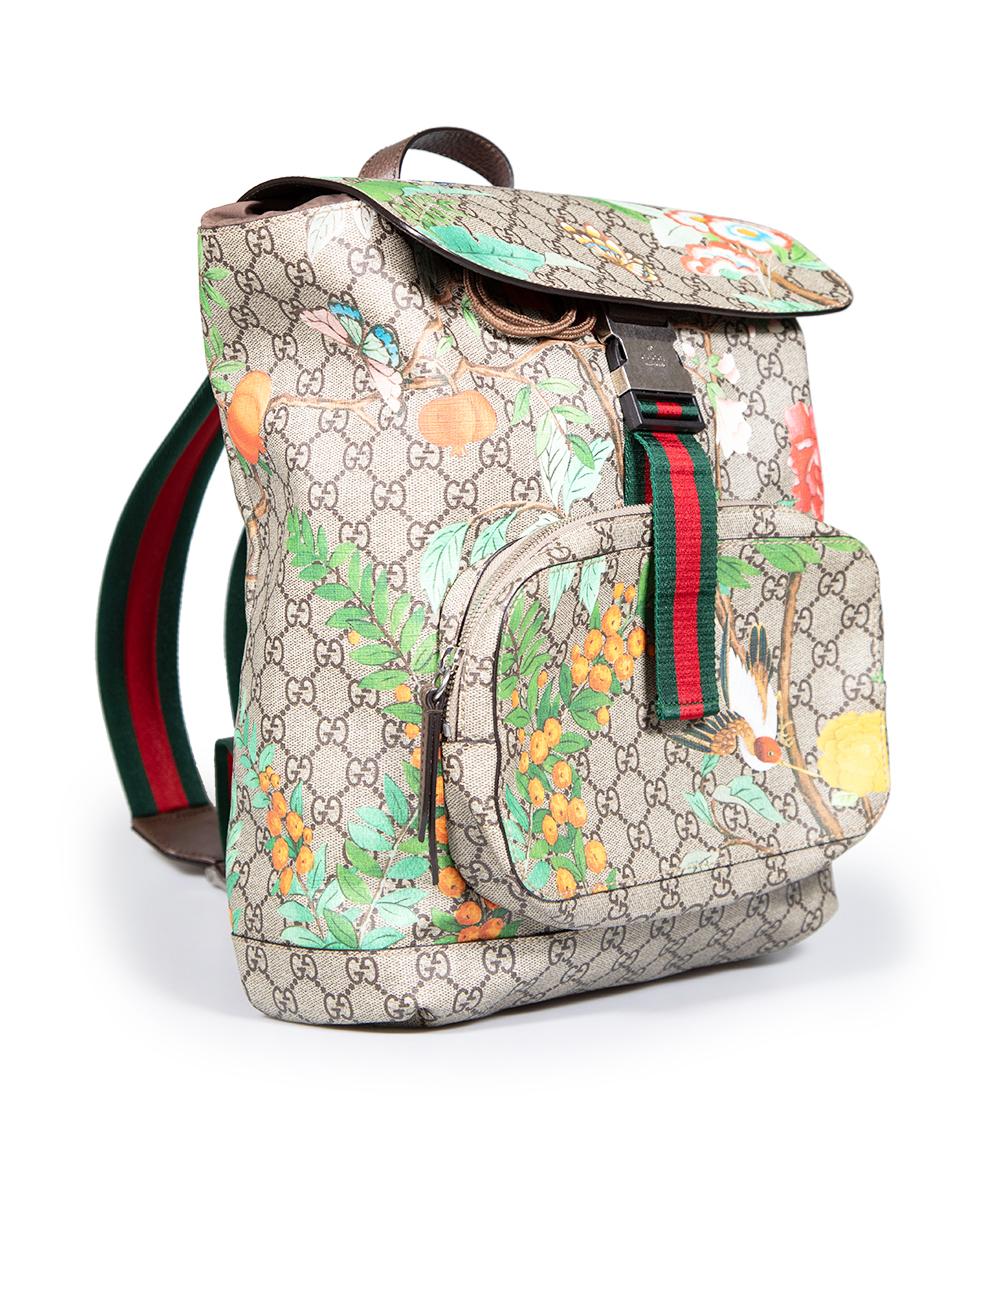 CONDITION is Very good. Hardly any visible wear to the bag is evident on this used Gucci designer resale item.
 
 
 
 Details
 
 
 Multicolour- grey tone
 
 Coated canvas
 
 Large backpack
 
 Logo pattern
 
 Floral and nature print
 
 1x Brown